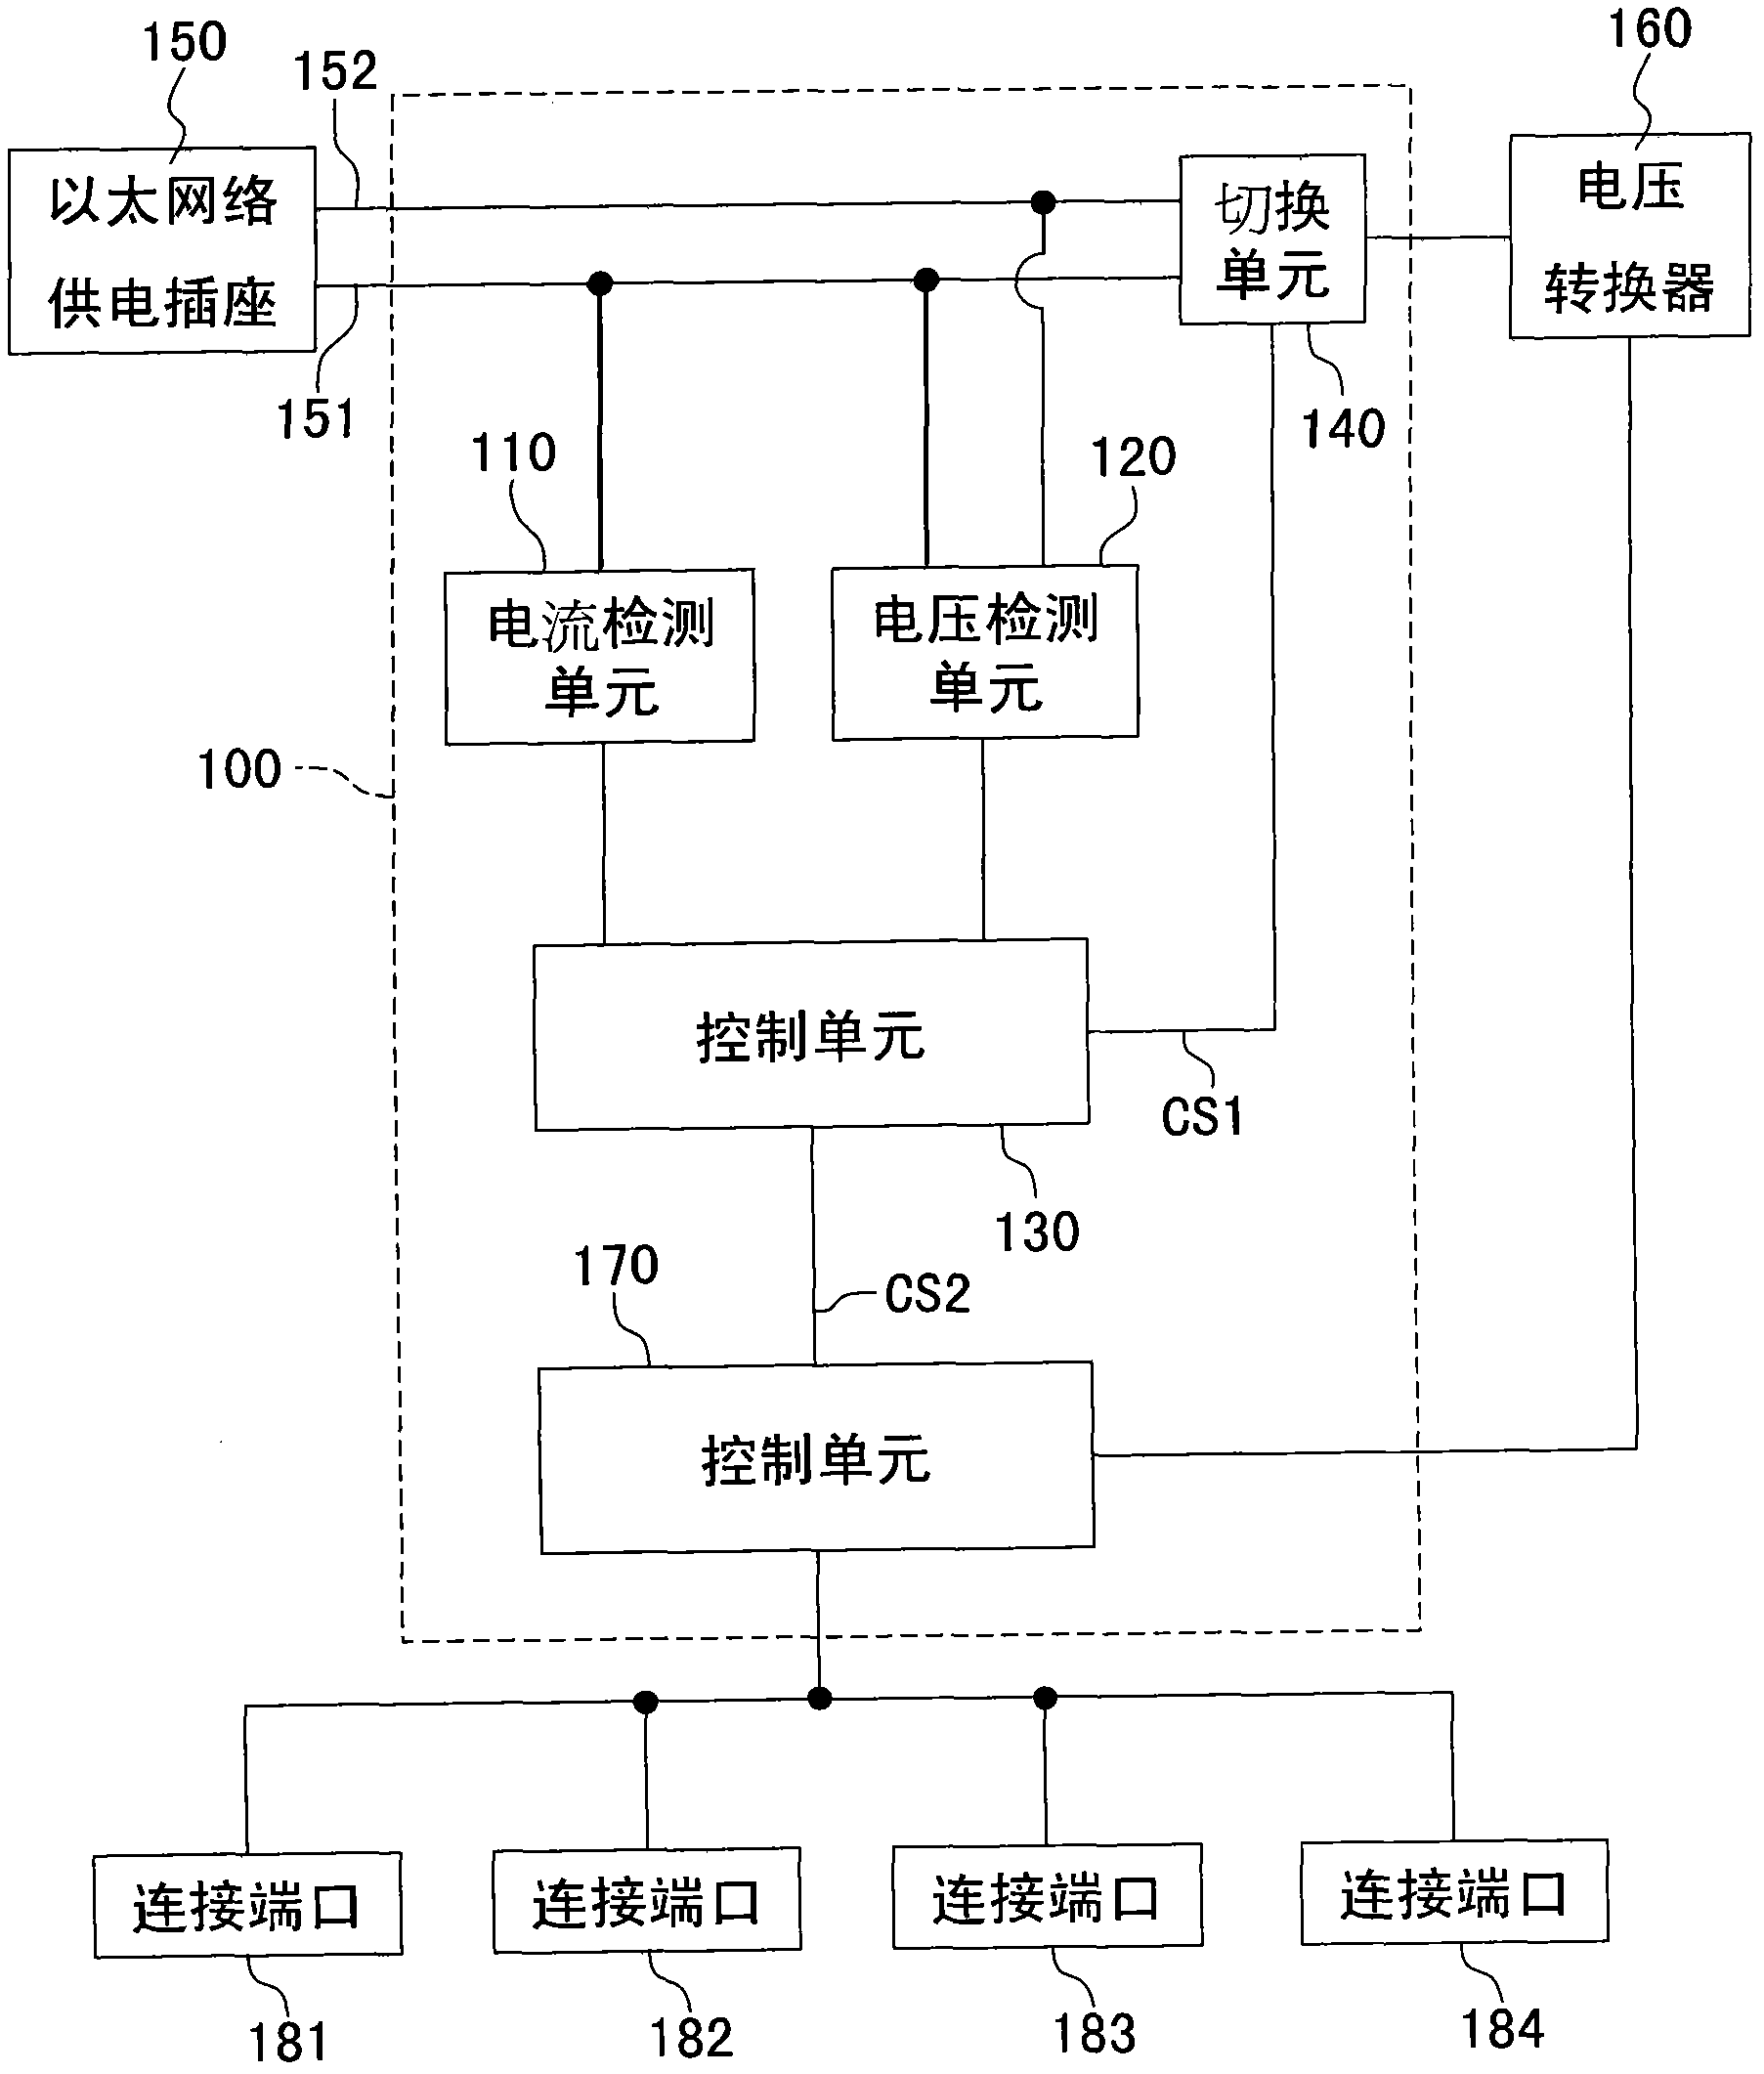 Overcurrent and overpower protection device